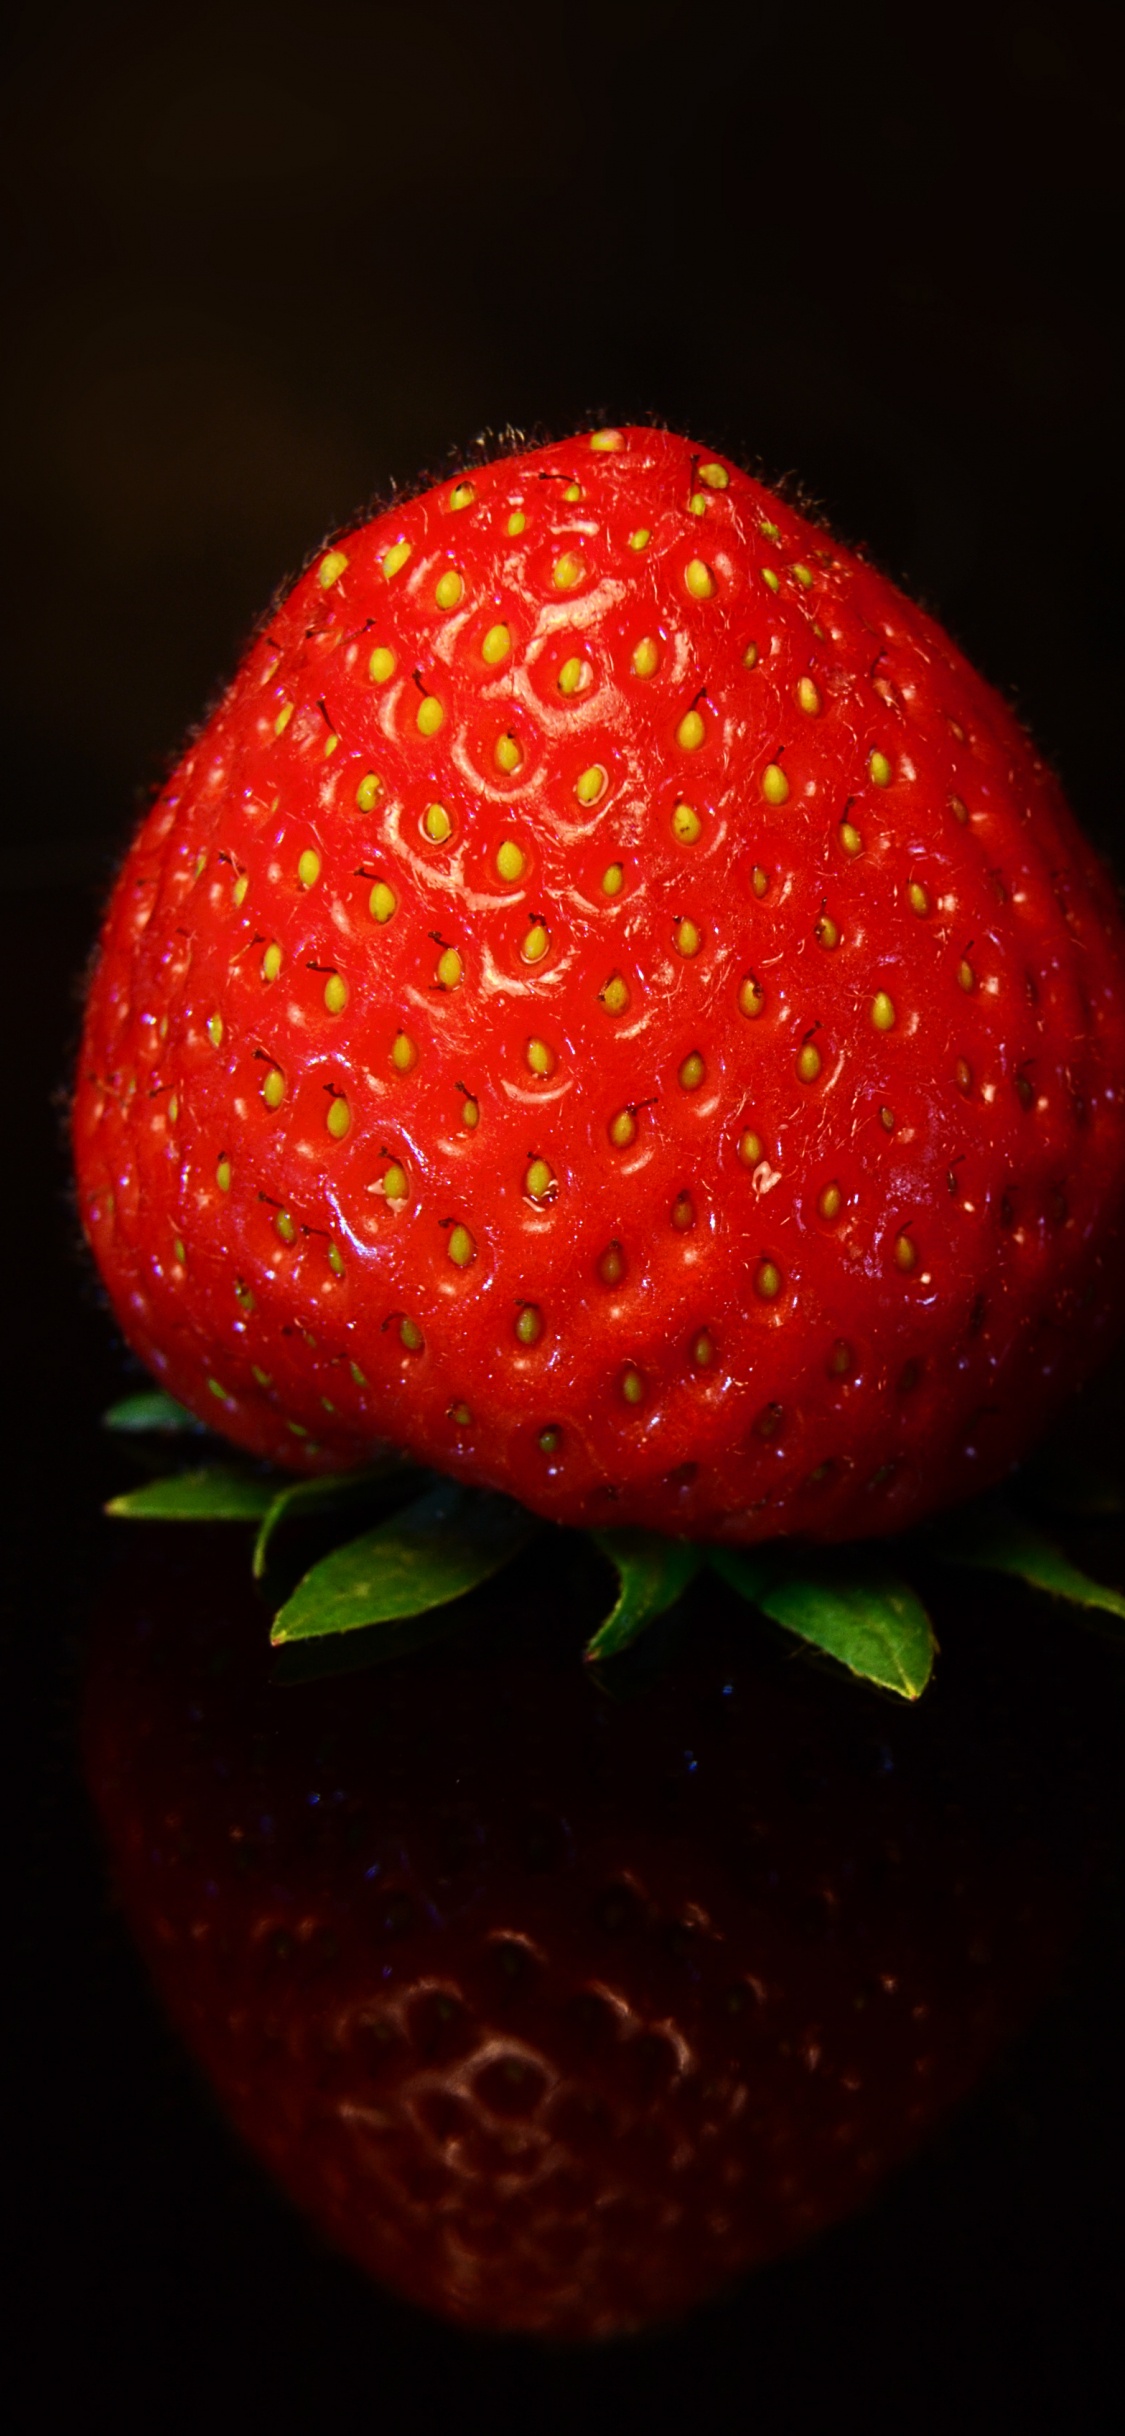 Red Strawberry Fruit in Close up Photography. Wallpaper in 1125x2436 Resolution